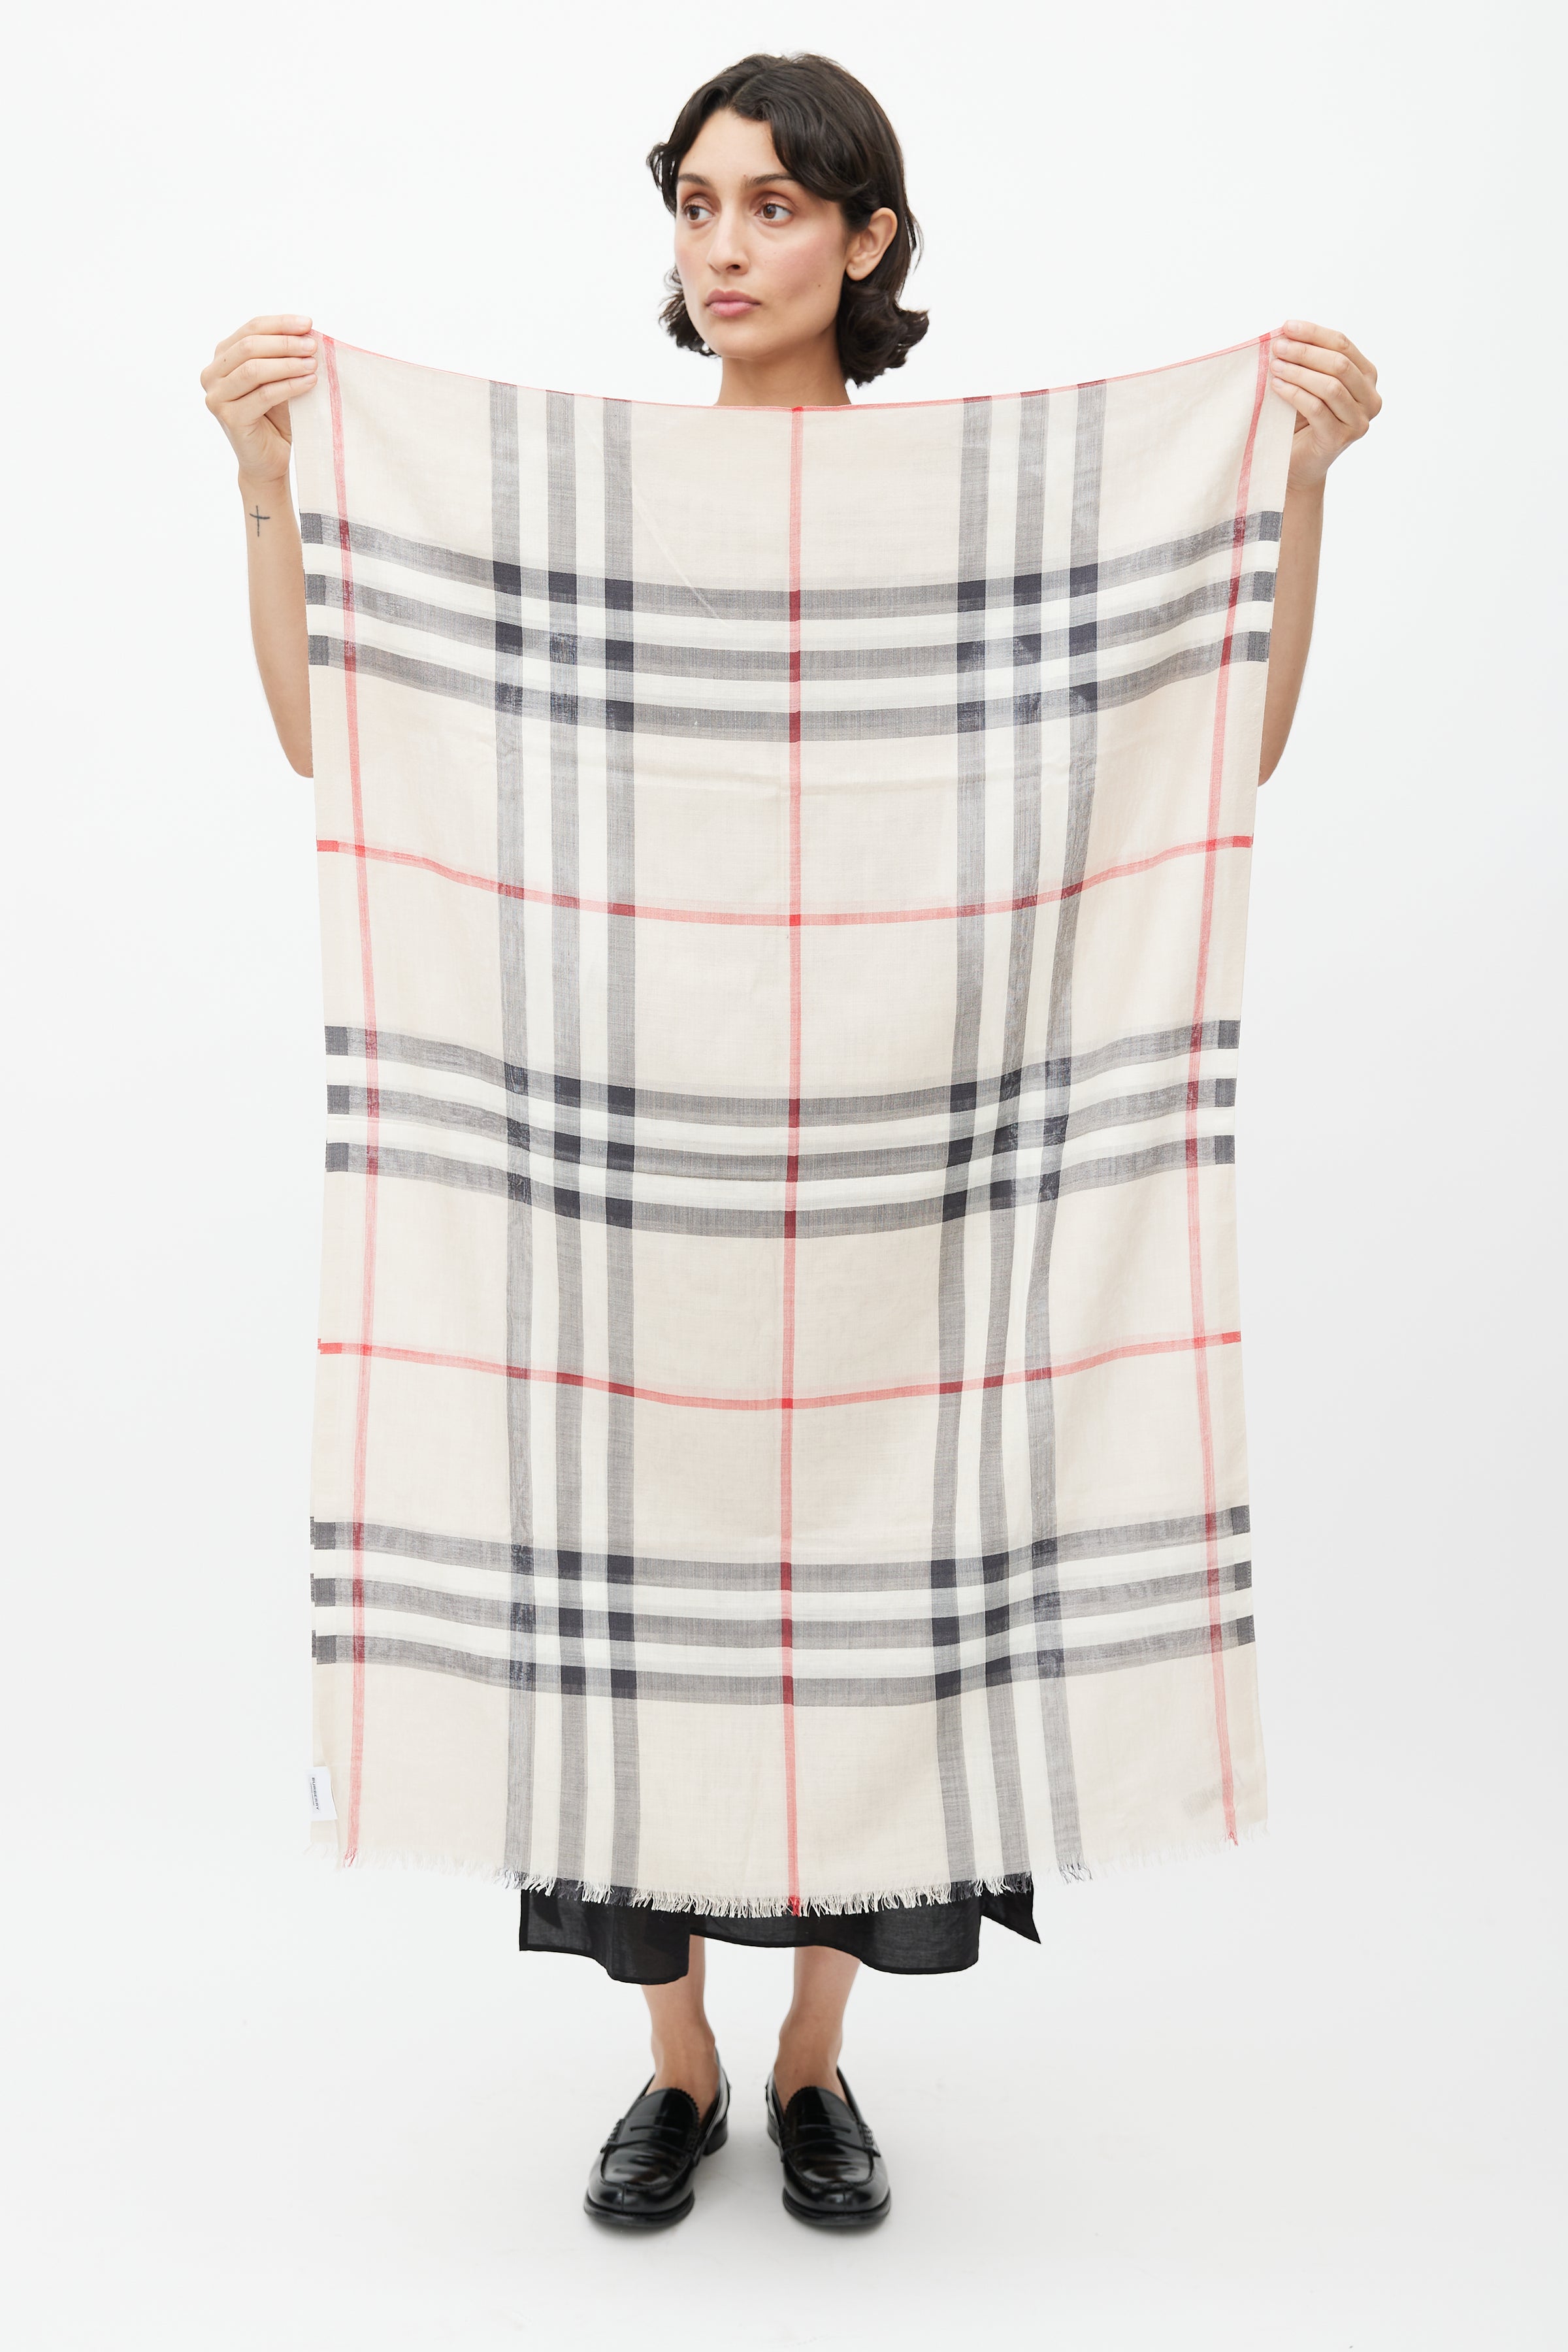 BURBERRY: Vintage Check scarf in cashmere - Beige